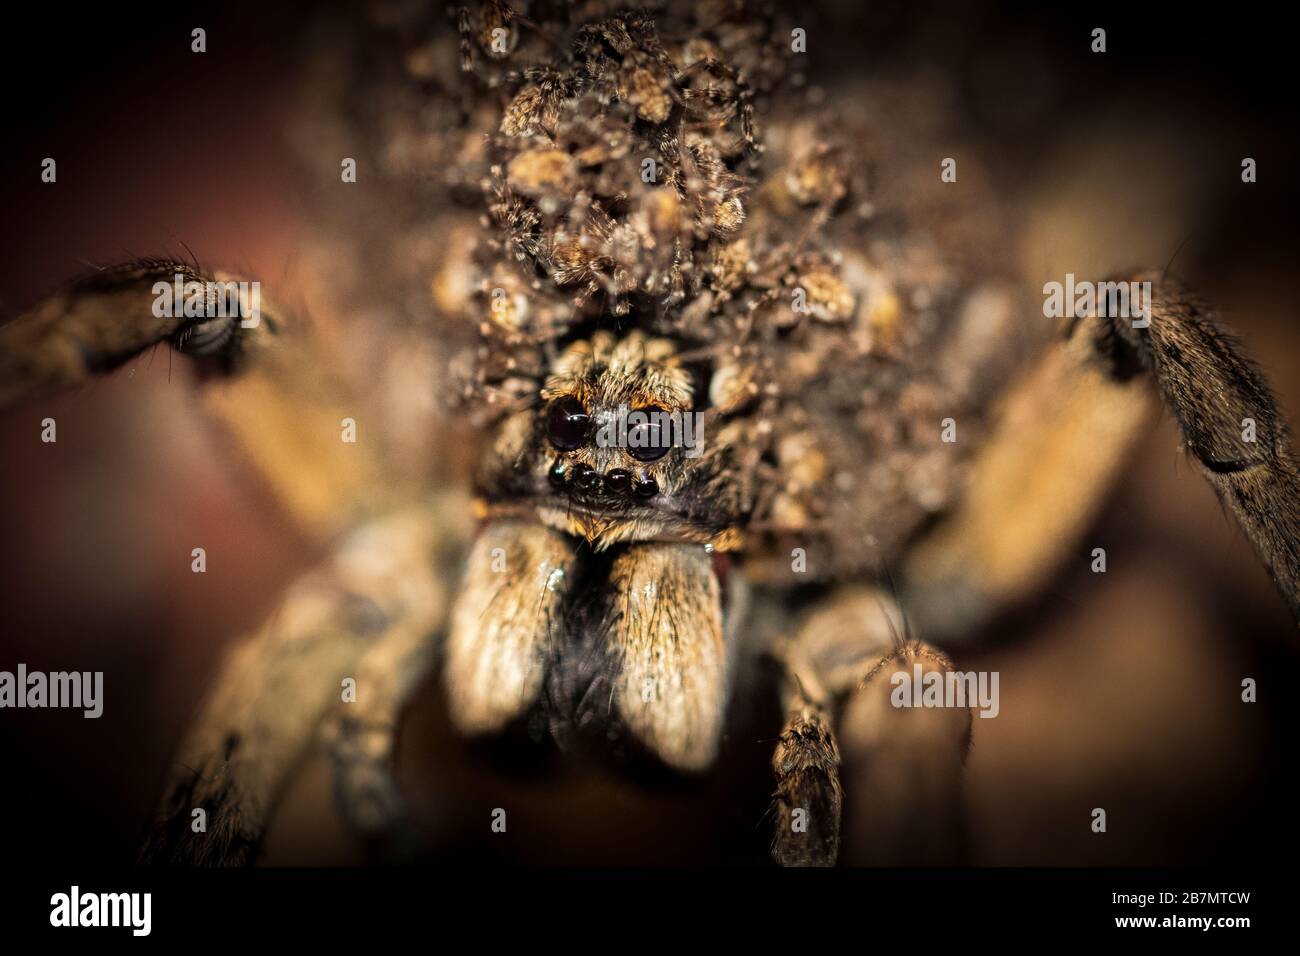 After the female wolf spider's babies (spiderlings) hatch from thier egg sack she carries them on her back until they are ready to hunt for their own Stock Photo